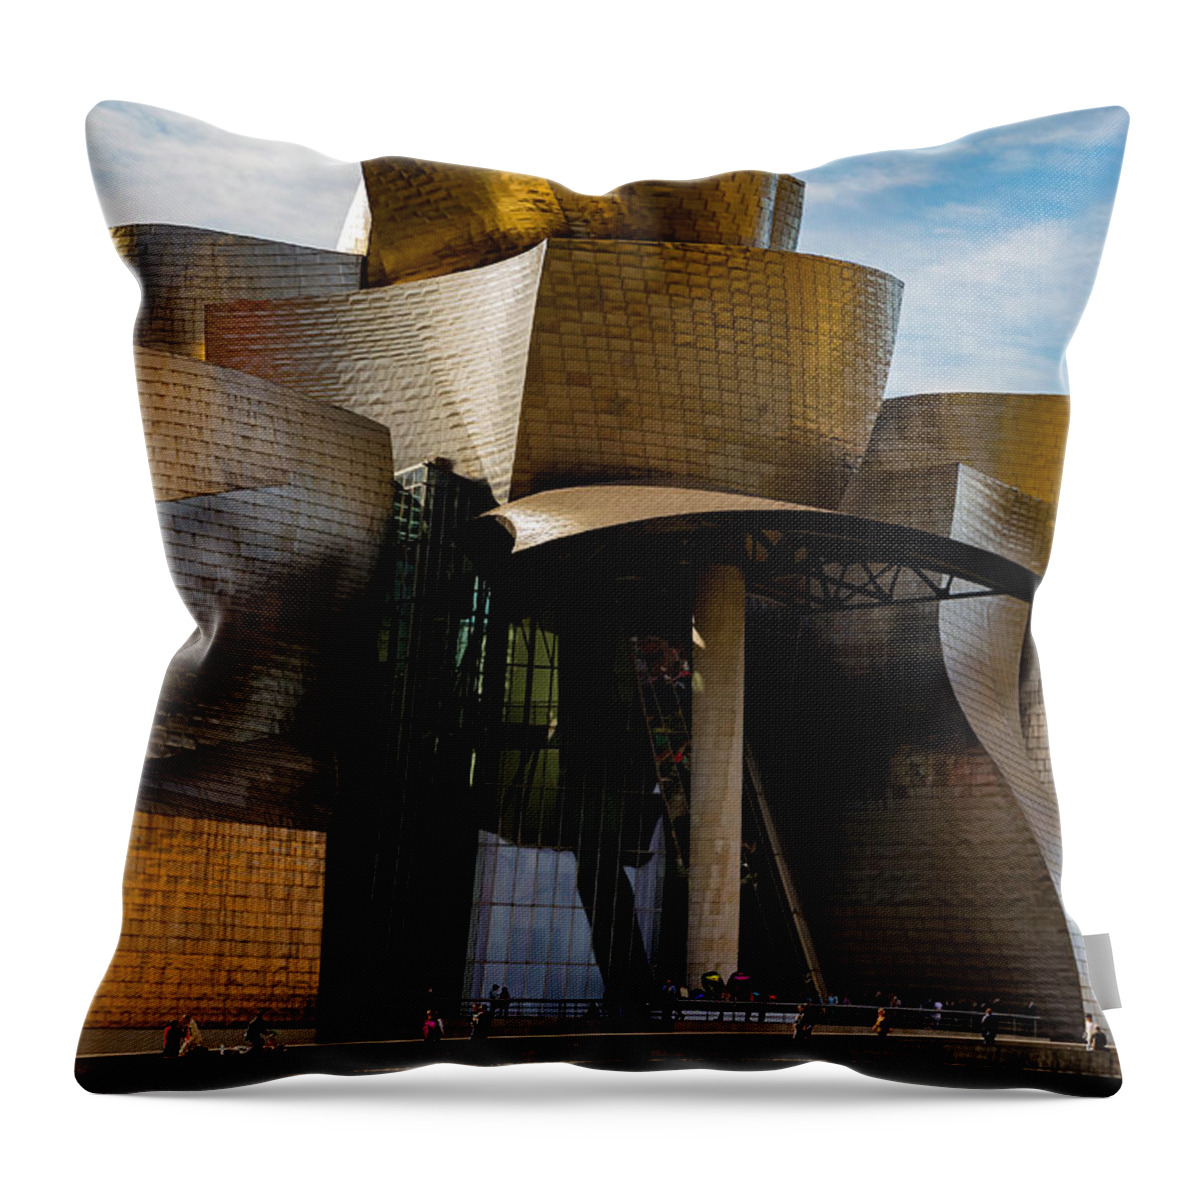 Spain Bilbao Guggenheim Museum Basque Country Frank Gehry Contemporary Architecture Nervion River City Daring And Innovative Curves Building Exterior Spectacular Building Deconstructivism Ferrovial Clad In Glass Throw Pillow featuring the photograph The Guggenheim Museum Spain Bilbao by Andy Myatt